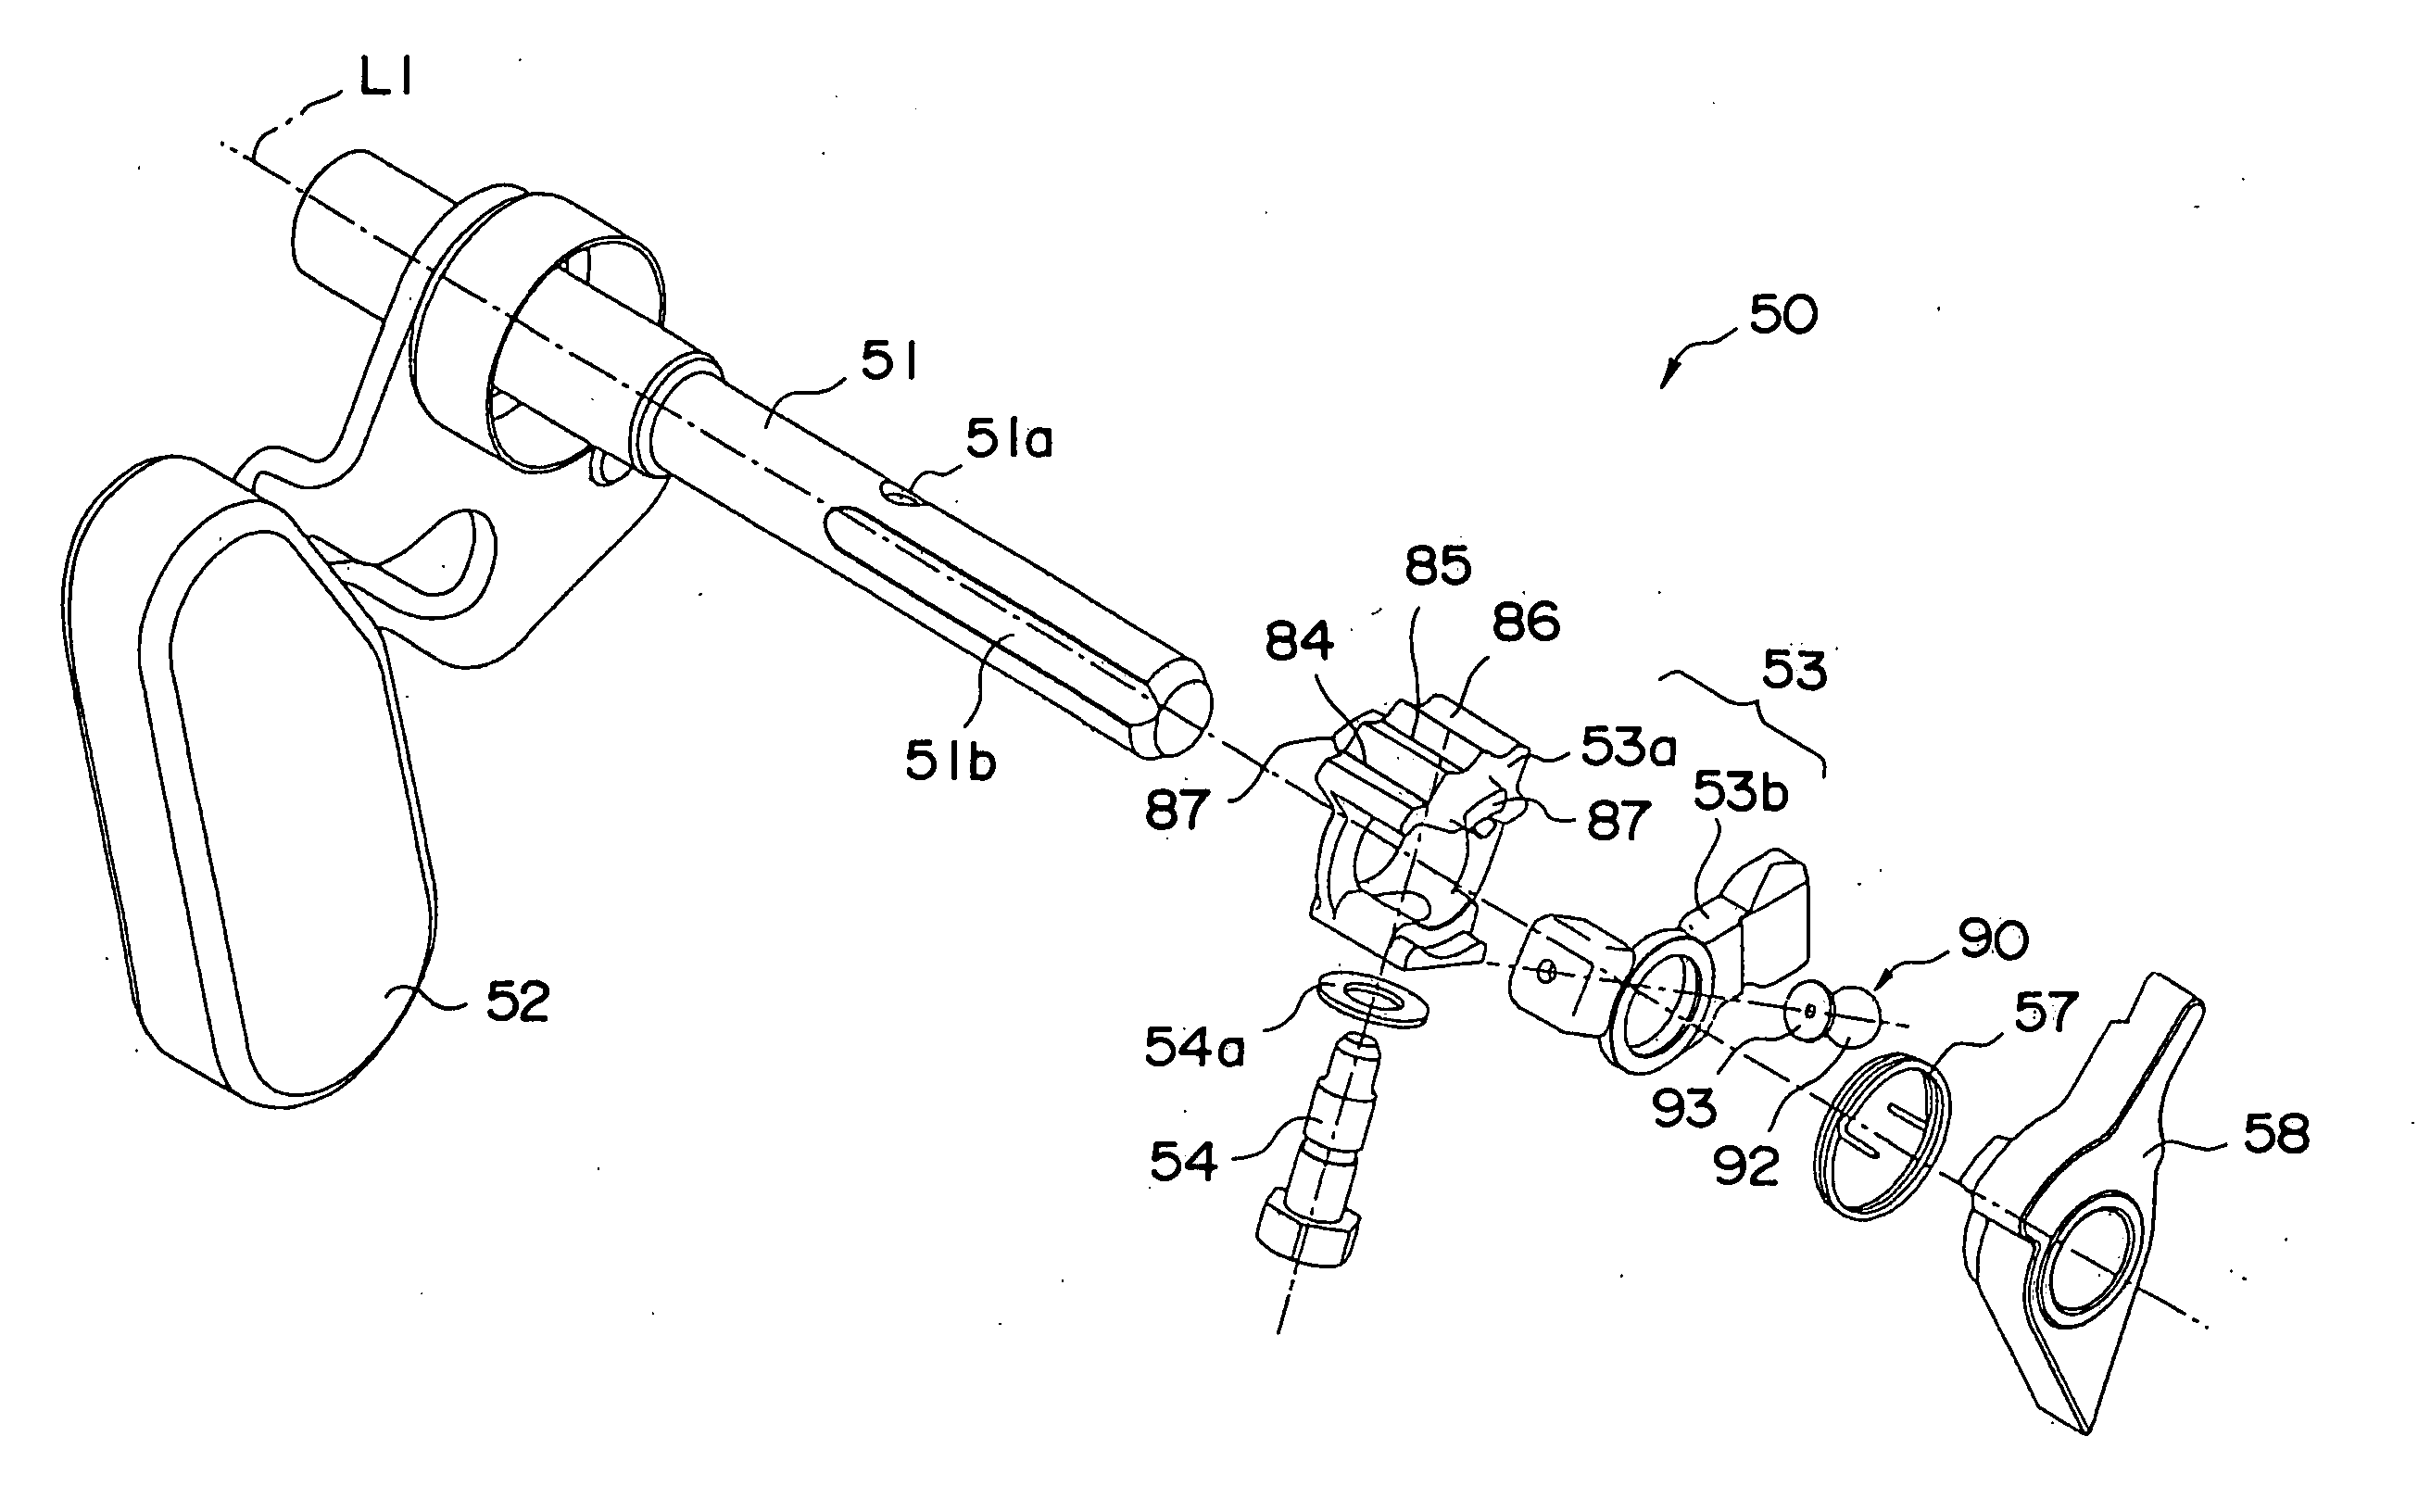 Gear-shifting device for manual transmission